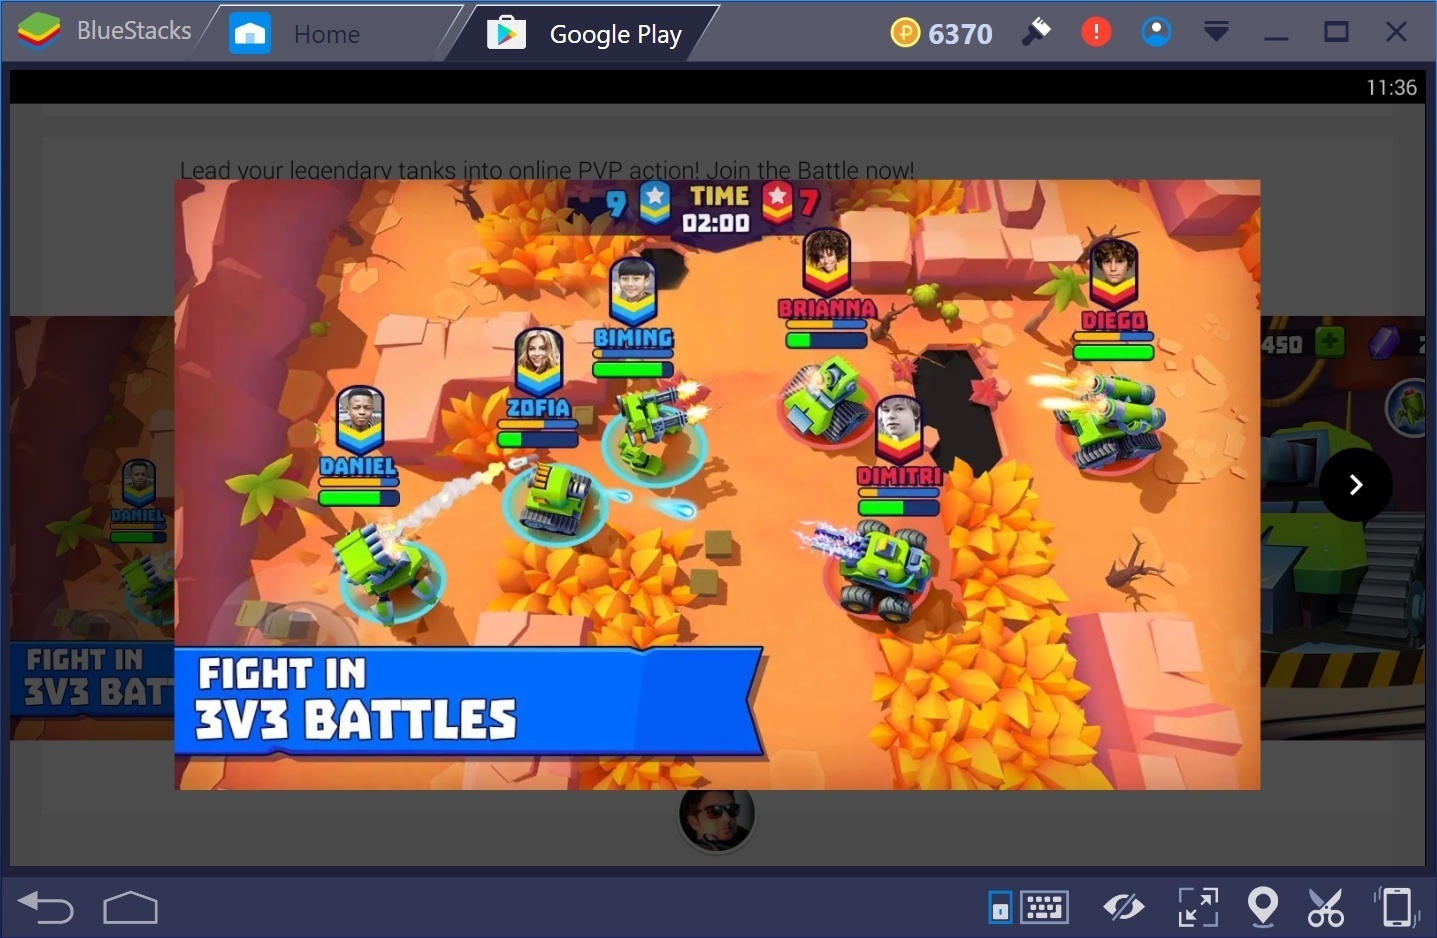 Tanks A Lot Realtime Multiplayer Battle Arena Game for PC Windows 10